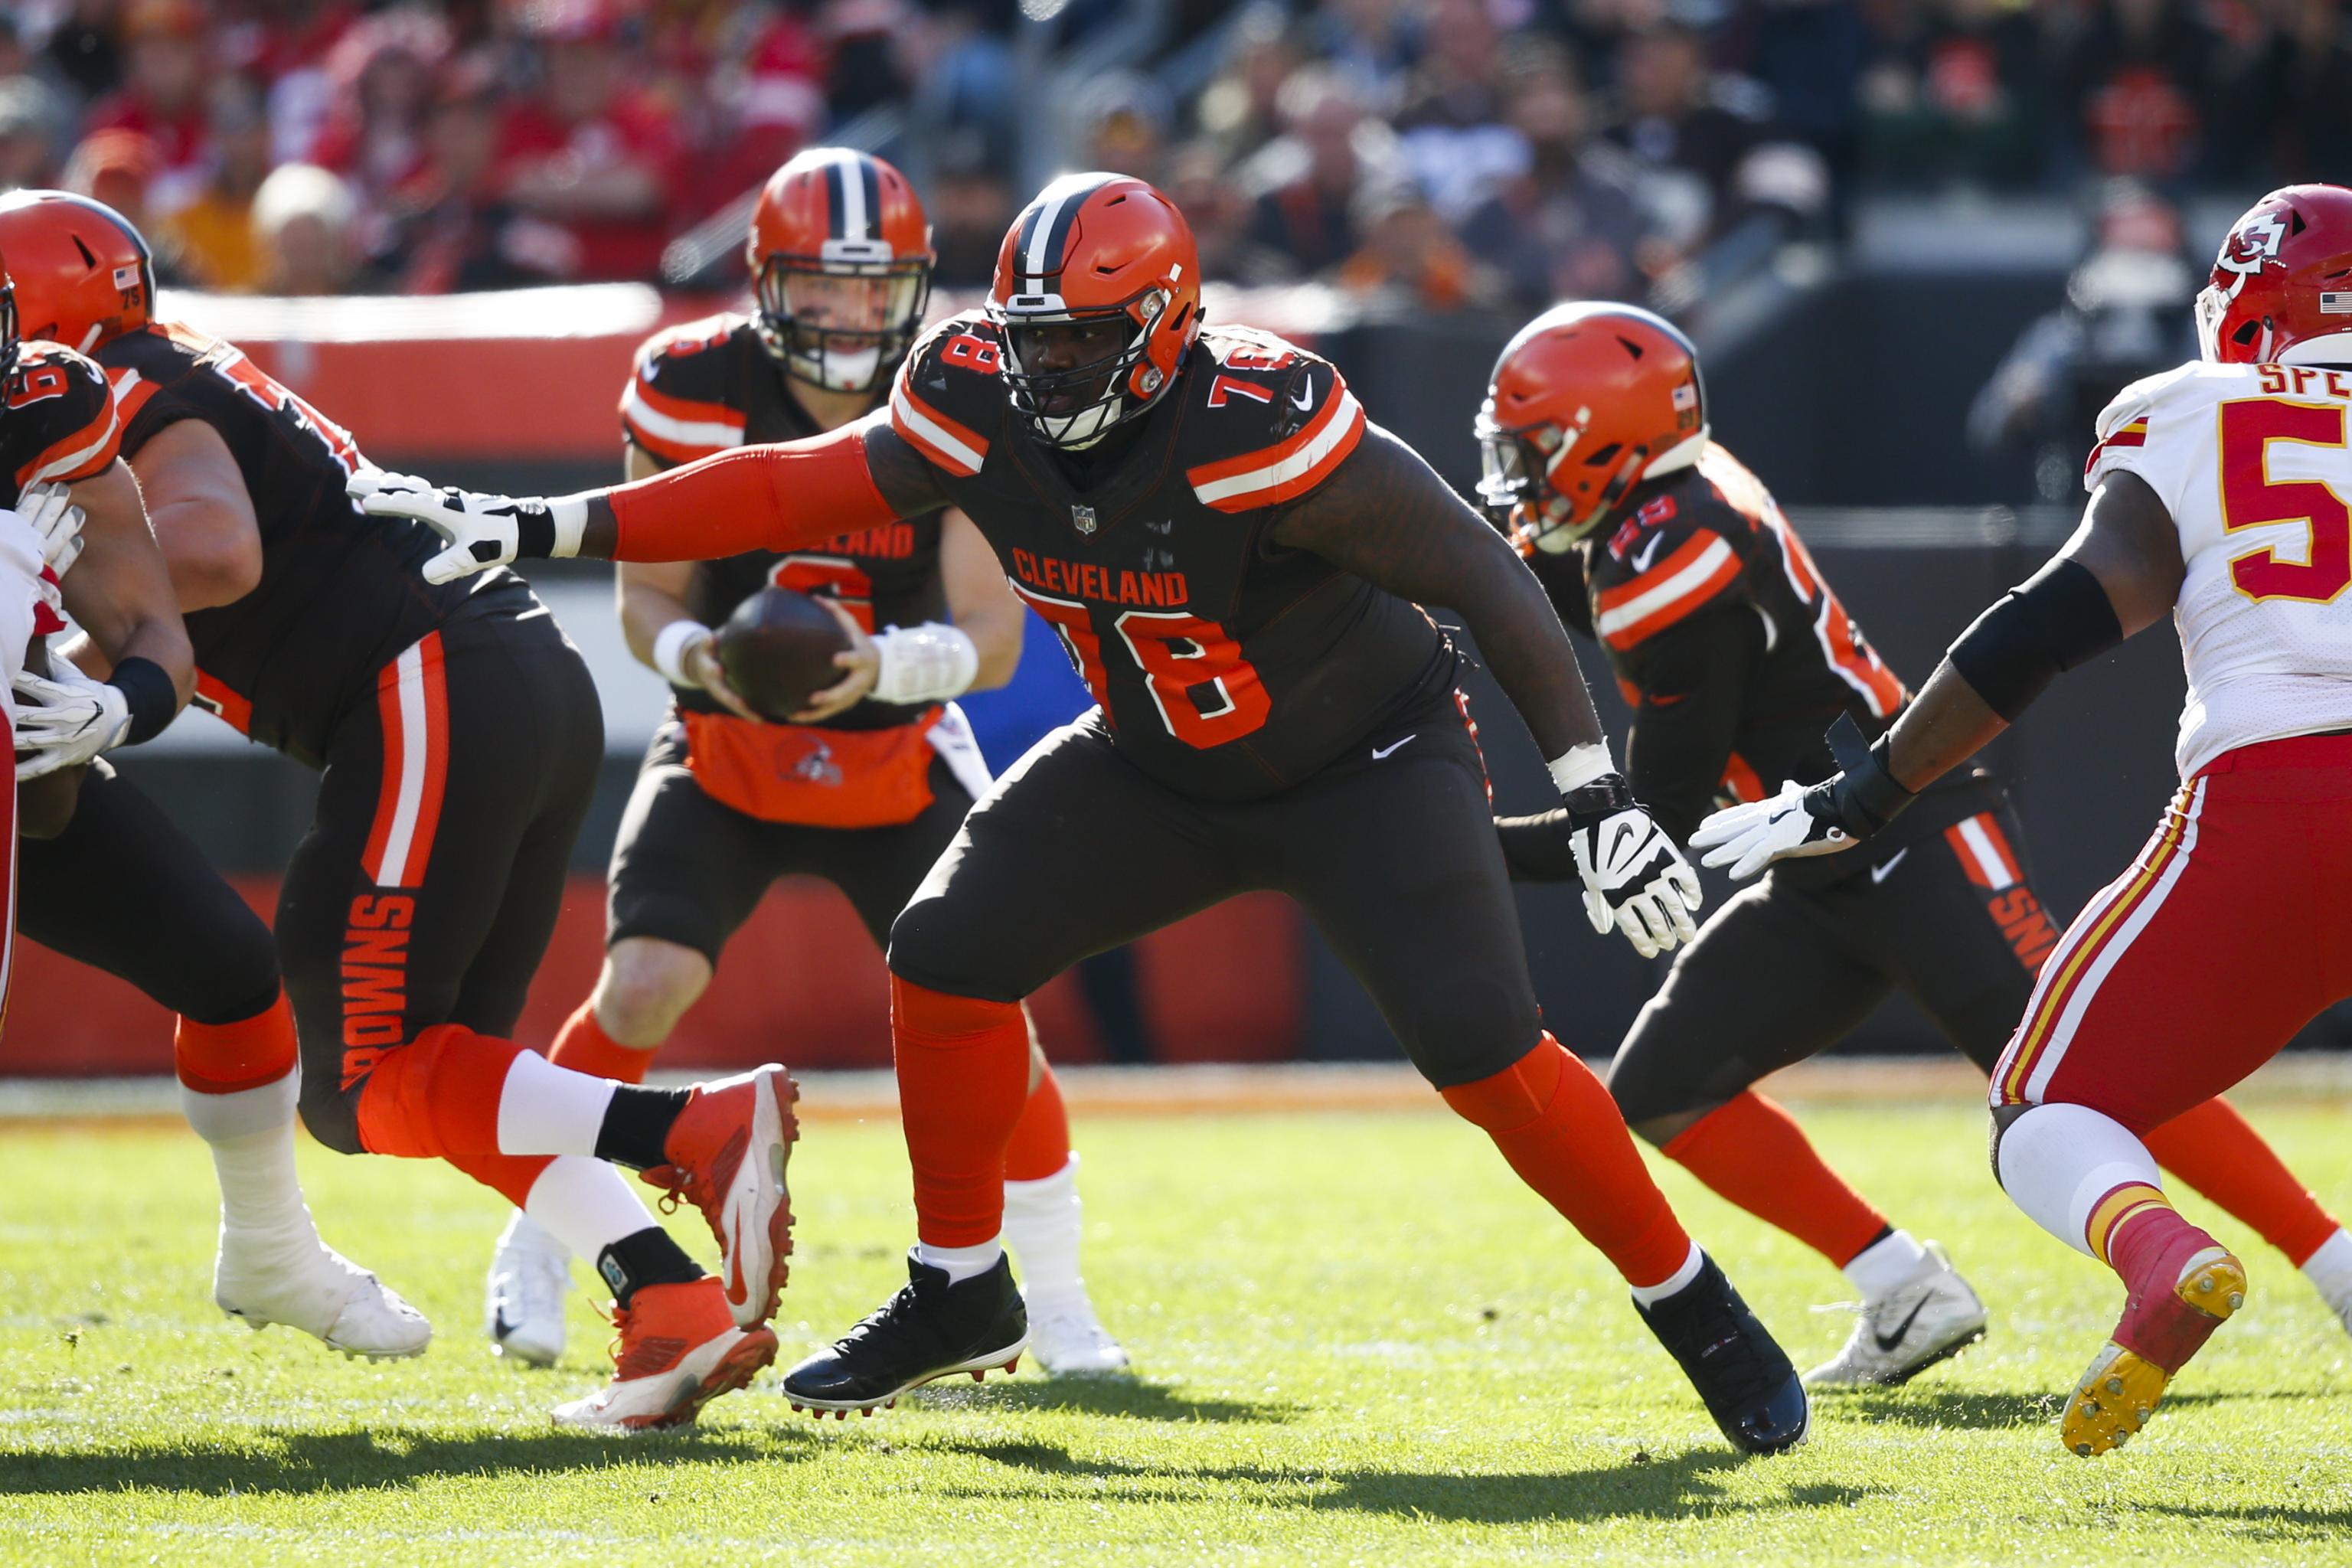 Cleveland Browns re-sign OL Greg Robinson, release wide receiver